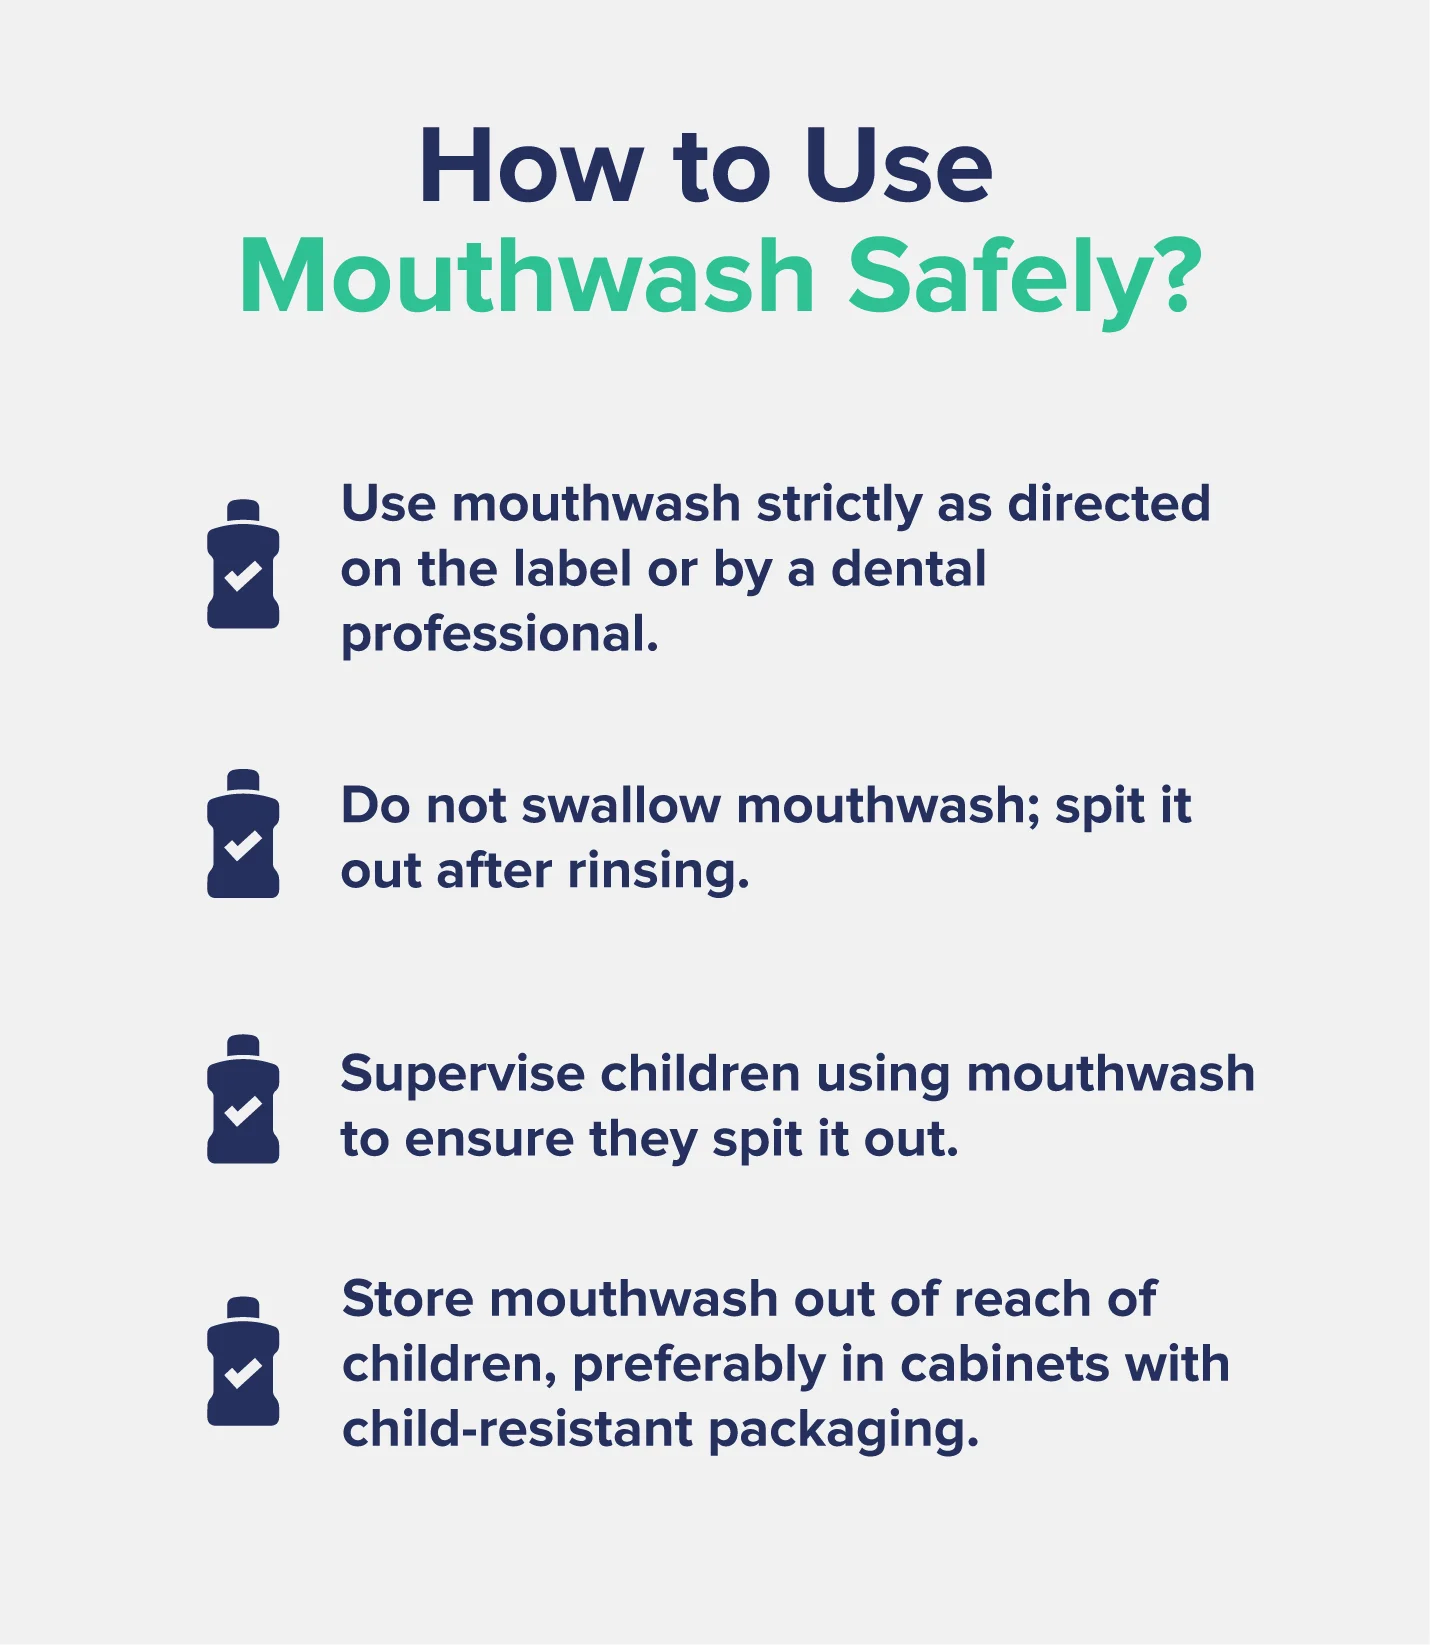 A graphic entitled "How to Use Mouthwash Safely?" listing several bulleted points as tips, such as using mouthwash only as directed and supervising children to ensure they spit it out.